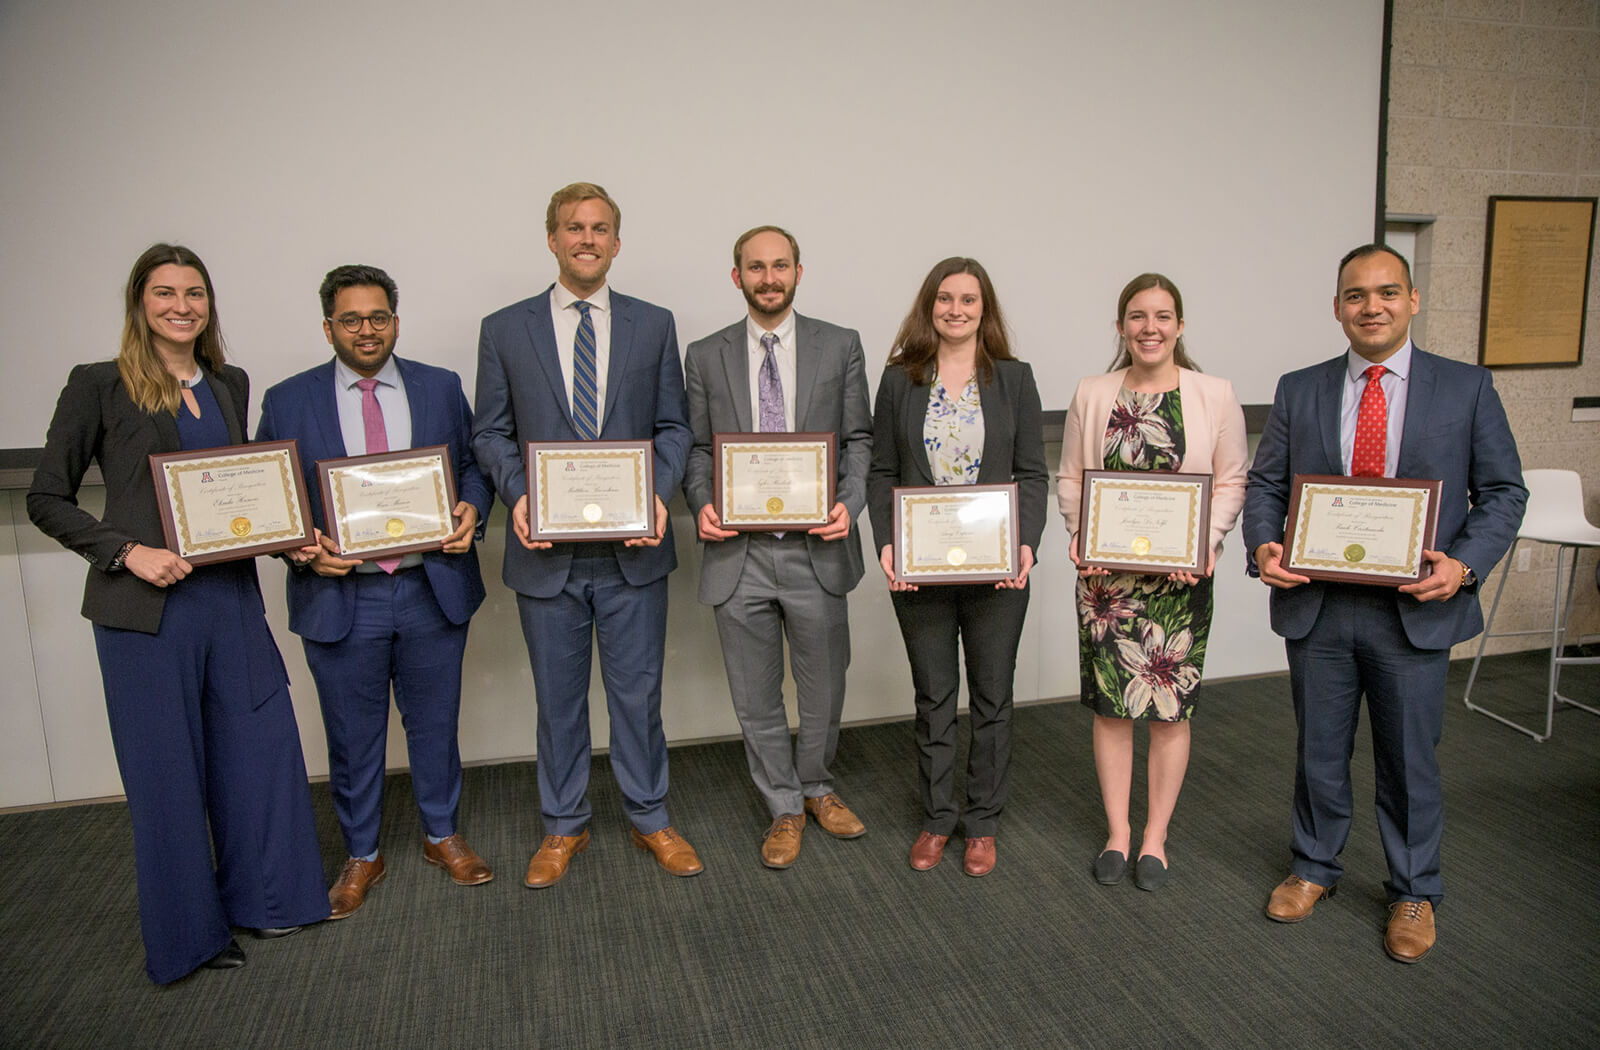 Medical Students Hold Up Their Awards at the Annual Student Research Symposium